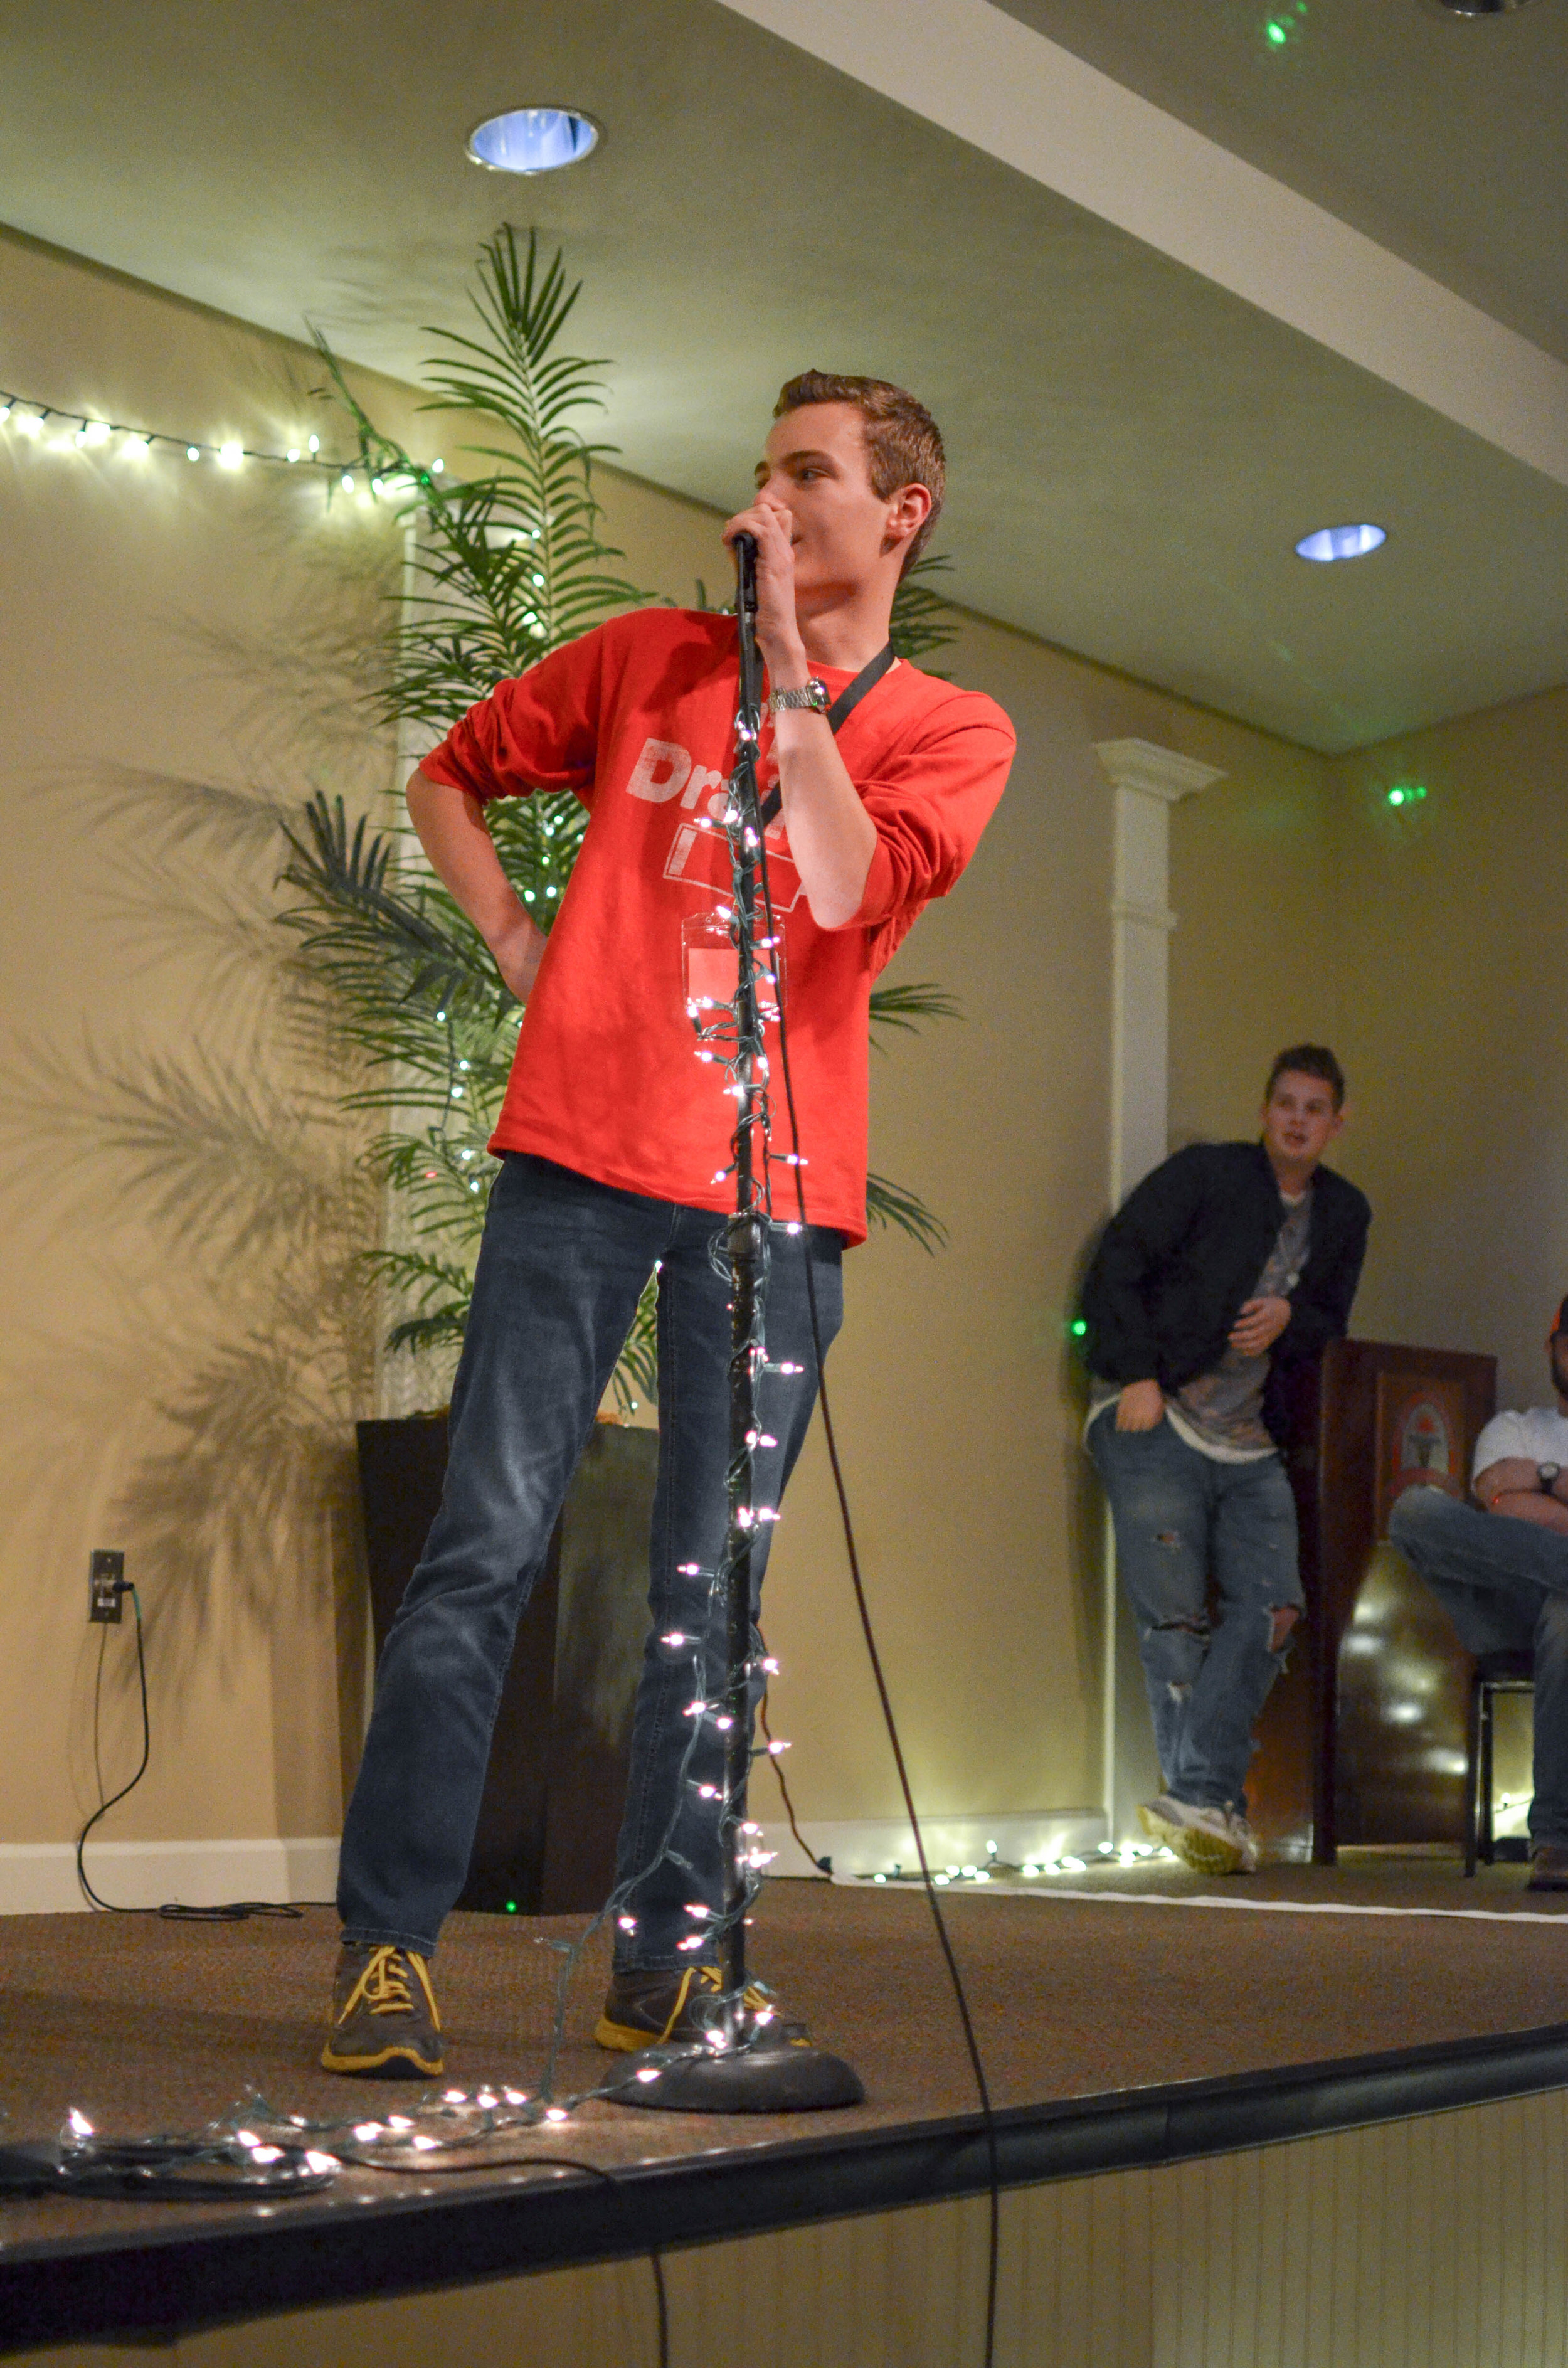 Landon Graber, an overnighter at NGU, performs standup comedy at coffeehouse.